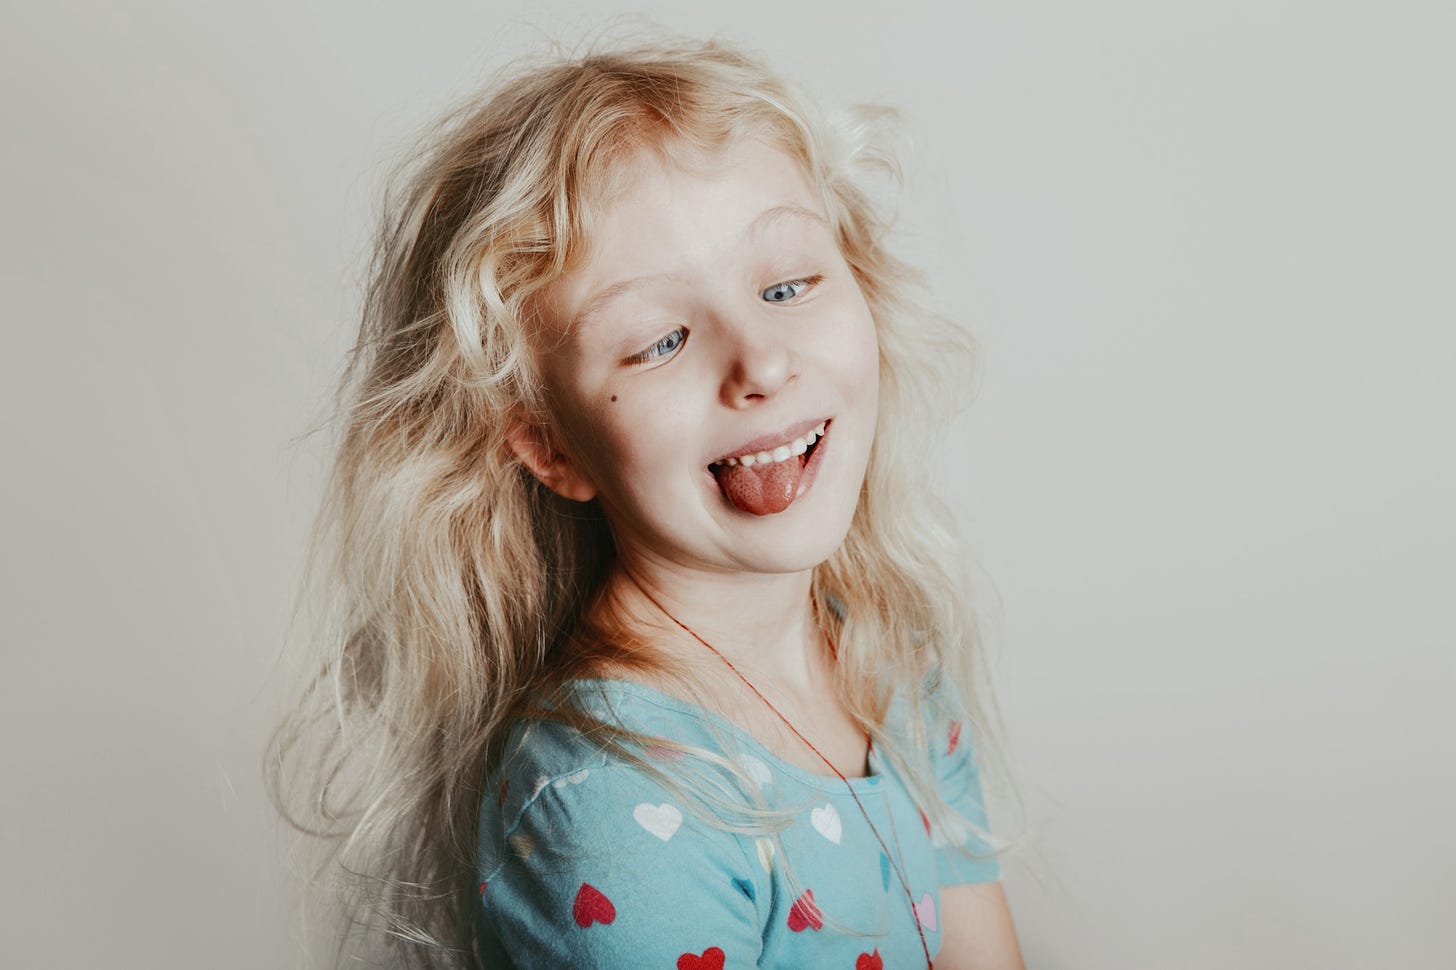 A blond girl pulls a silly face at the camera.